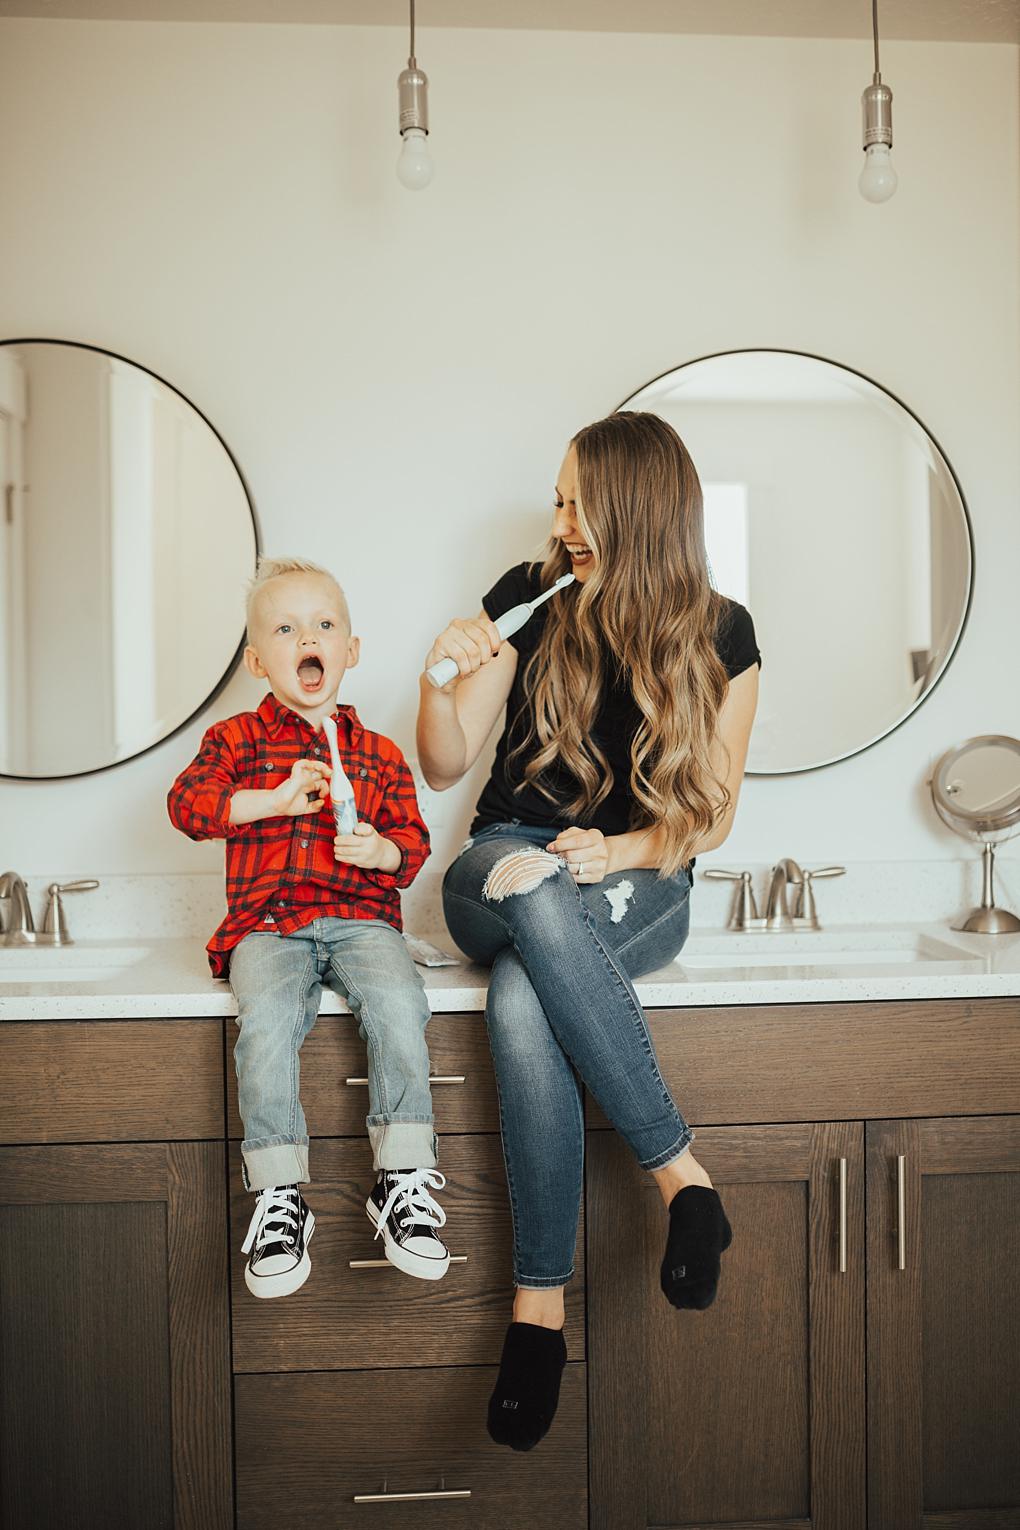 Quality Time Together No Matter Where You Are by Utah mom blogger Dani Marie